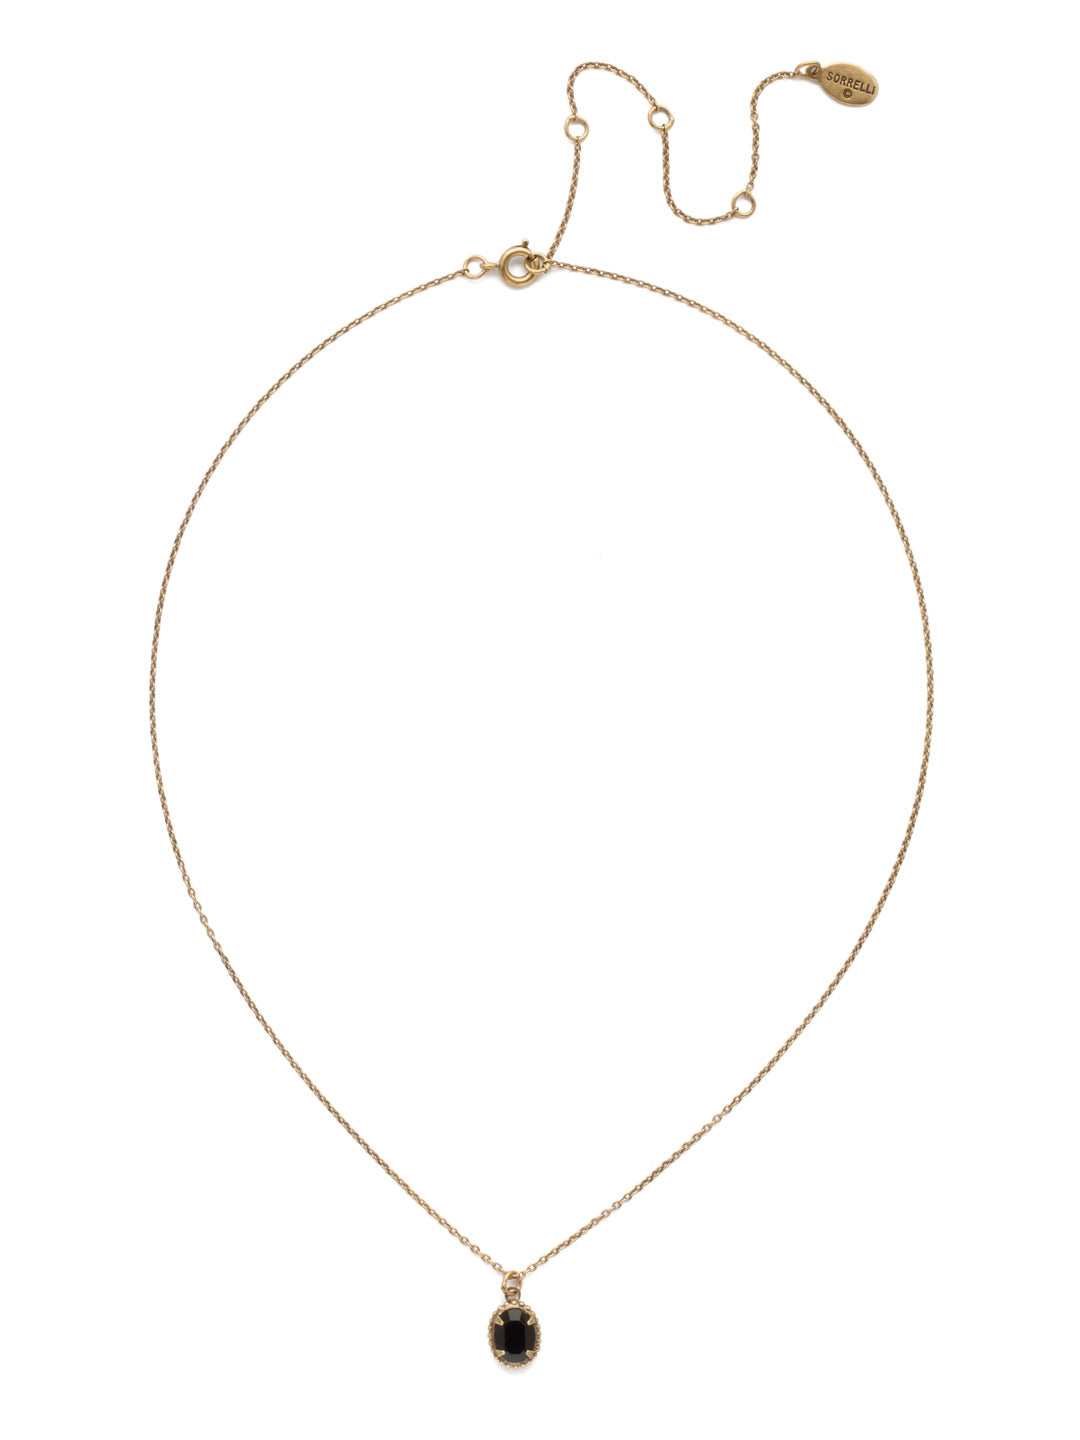 Maisie Pendant Necklace - NEF49AGJET - This is the perfect day-to-night sparkling tiny pendant necklace that has an adjustable chain to fit your neckline. From Sorrelli's Jet collection in our Antique Gold-tone finish.